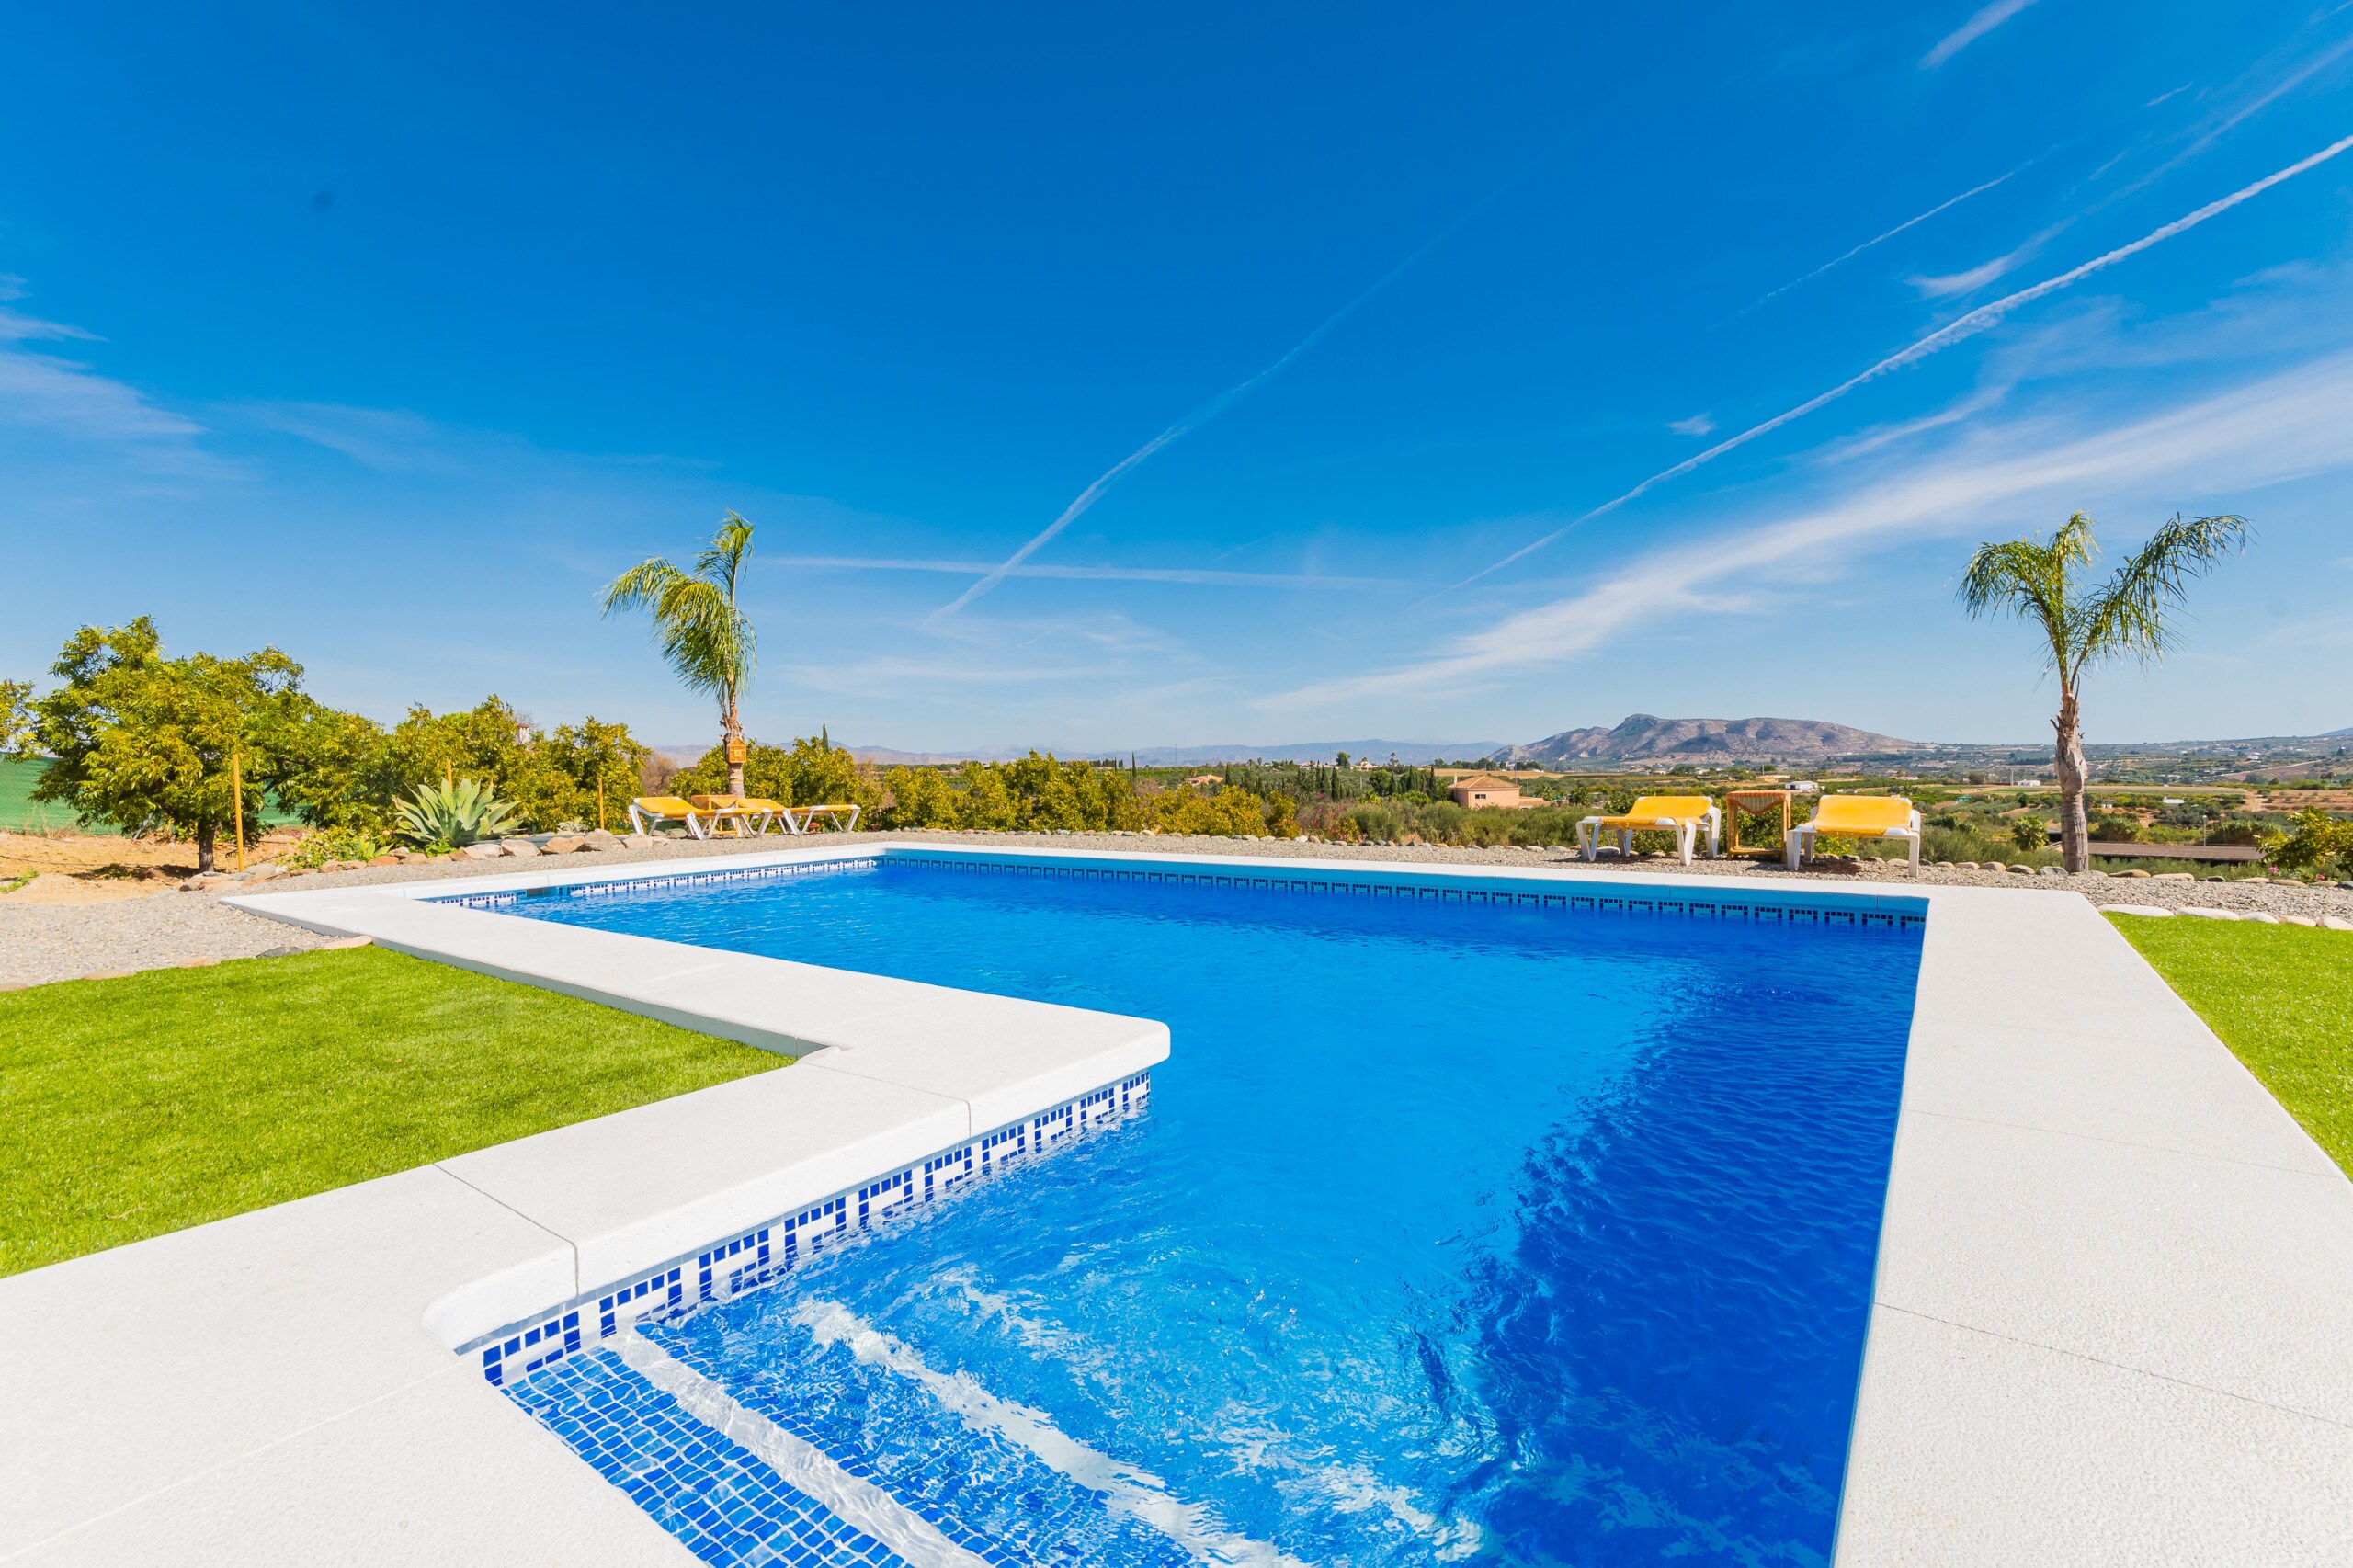 Enjoy the private pool of this villa in Coín